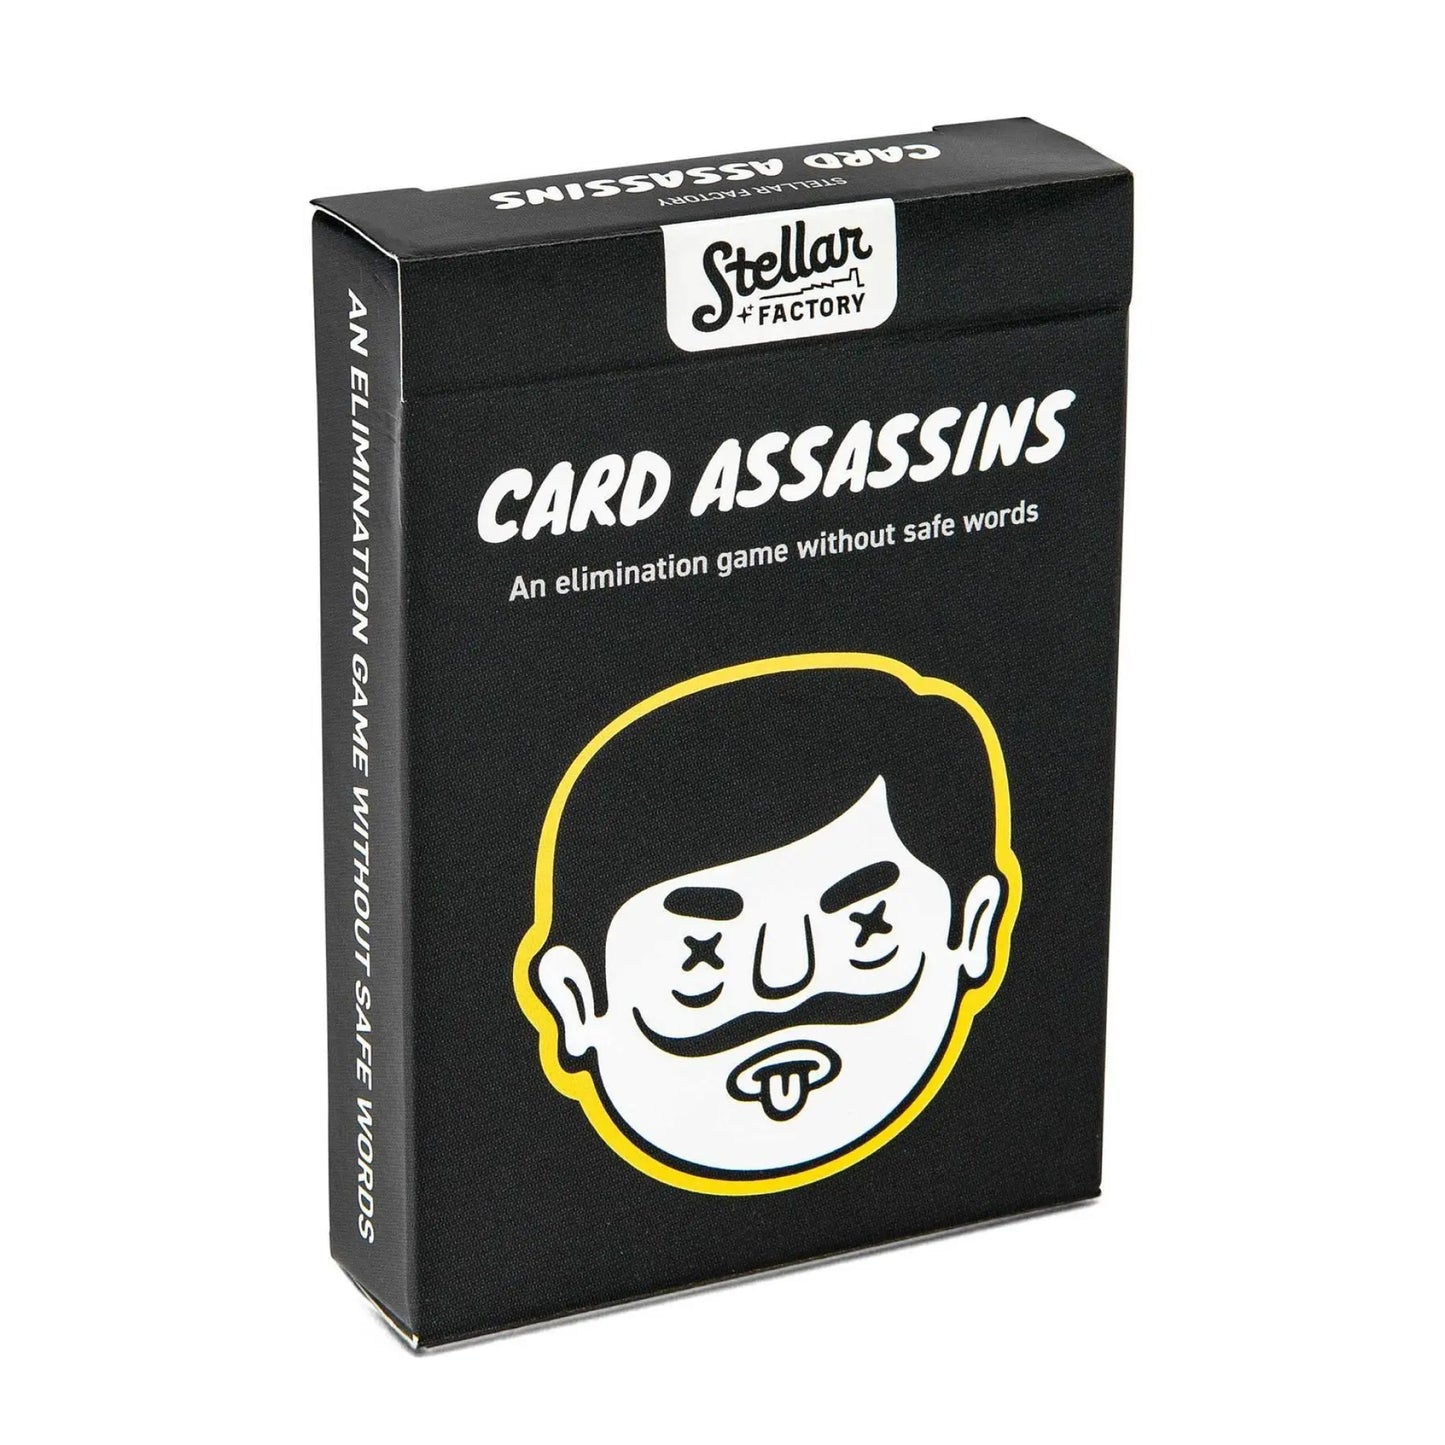 Card Assassins: A Party Game Without Safe Words